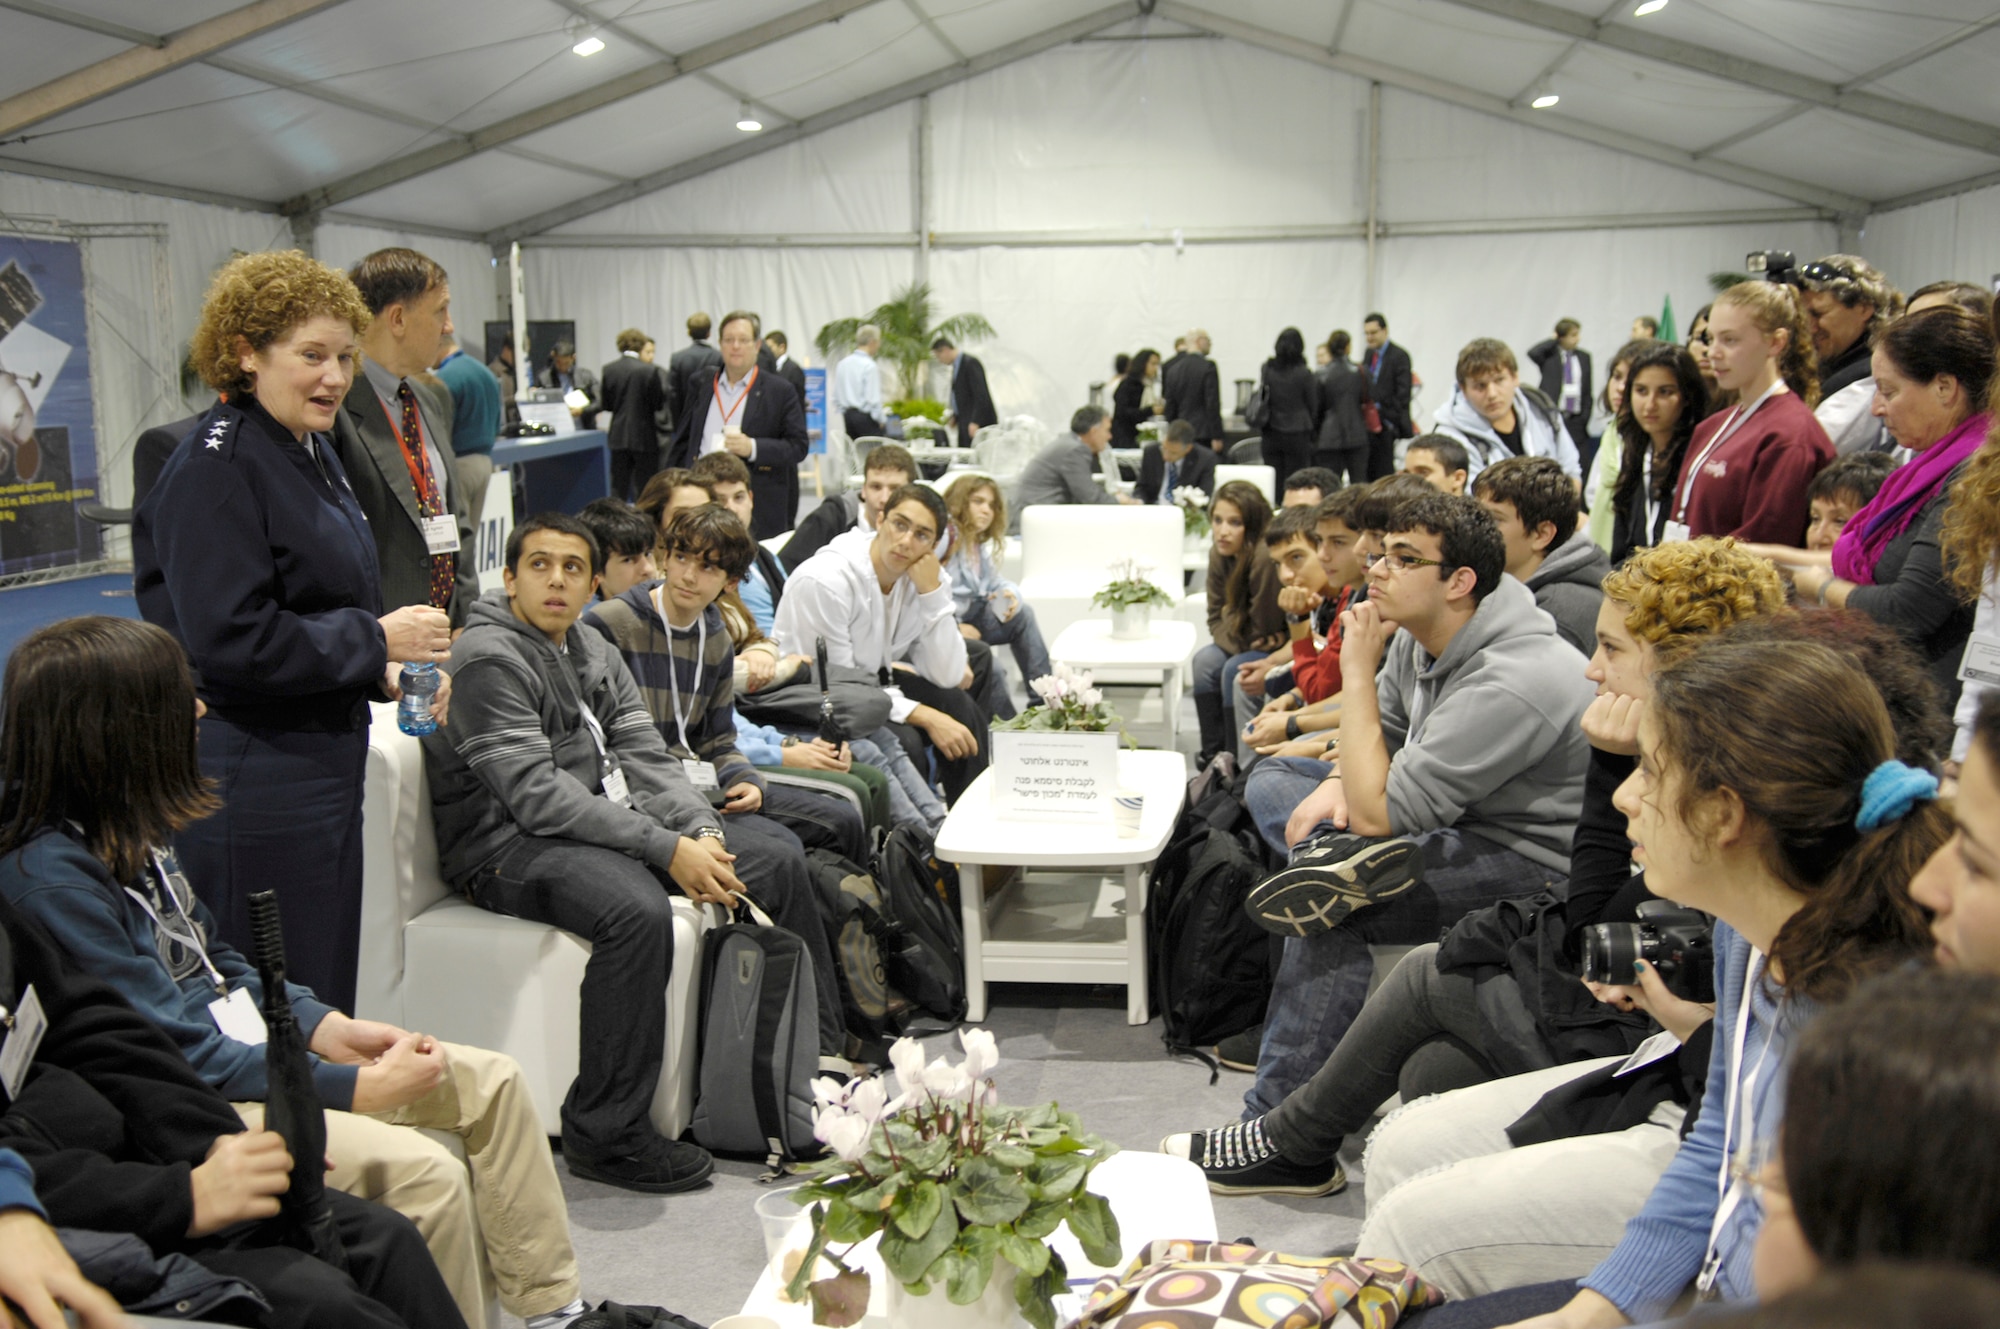 Lt. Gen. Susan Helms speaks with students at the Sixth Annual Ilan Ramon International Space Conference in Tel-Aviv, Israel, Jan. 30, 2011. The students used this opportunity to ask the general questions about her assignment as an astronaut with NASA. During her two-day visit to Tel-Aviv, General Helms delivered a keynote speech at the conference and met with Israeli military leaders. General Helms is the commander of U.S. Strategic Command's Joint Functional Component Command for Space. (U.S. Air Force photo/Major Stacie N. Shafran)